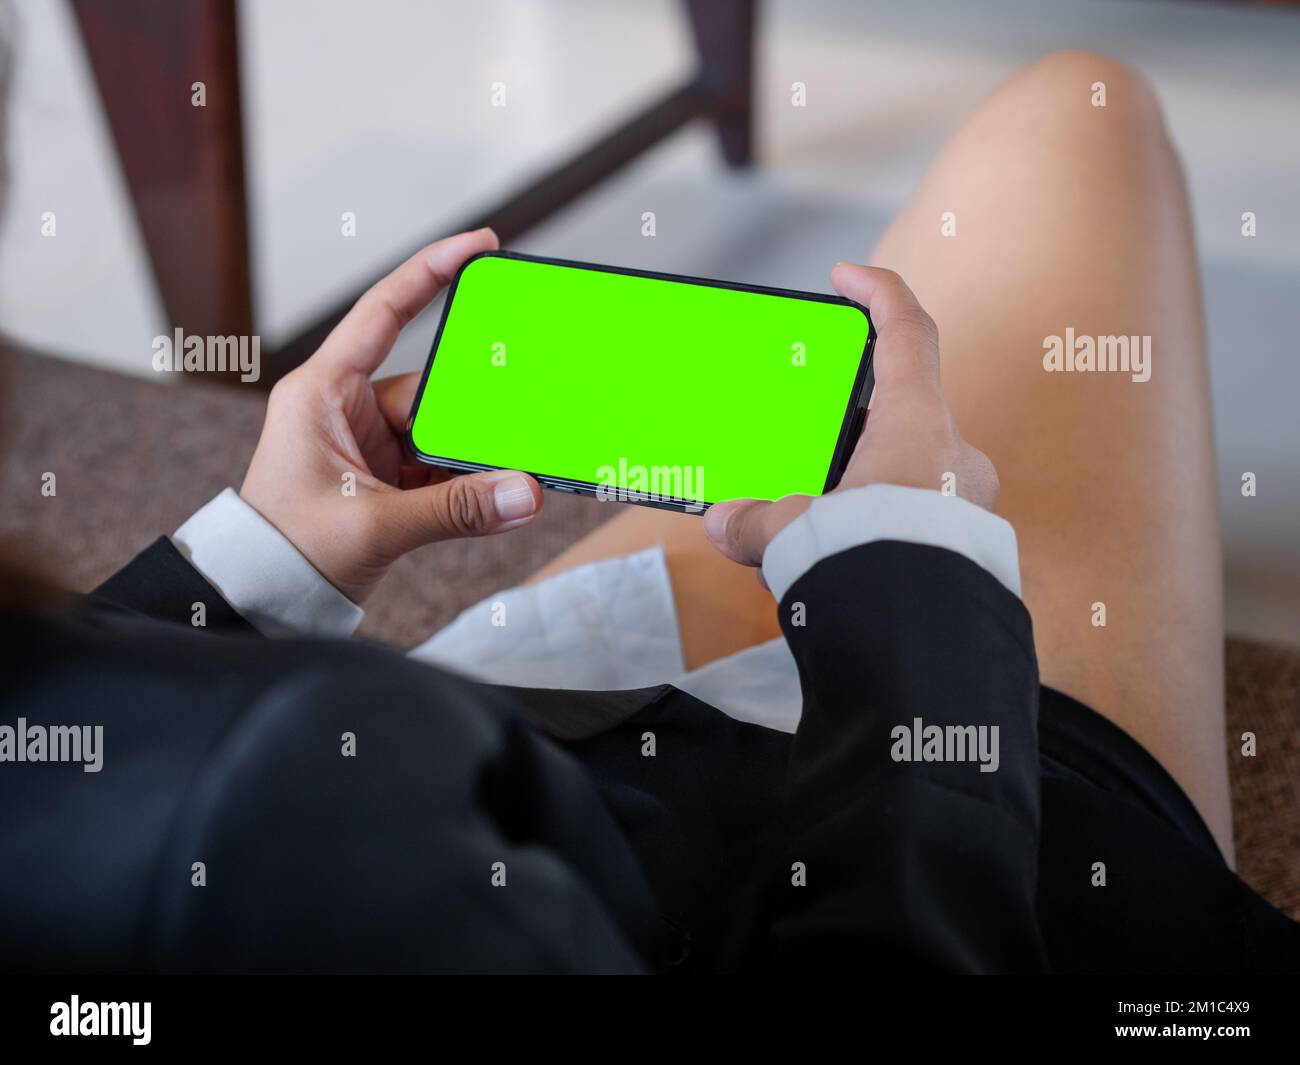 Green screen on mobile phone horizontal style in business woman's hands who wearing formal suit and shorts, relaxed sit with cross legs on couch in co Stock Photo